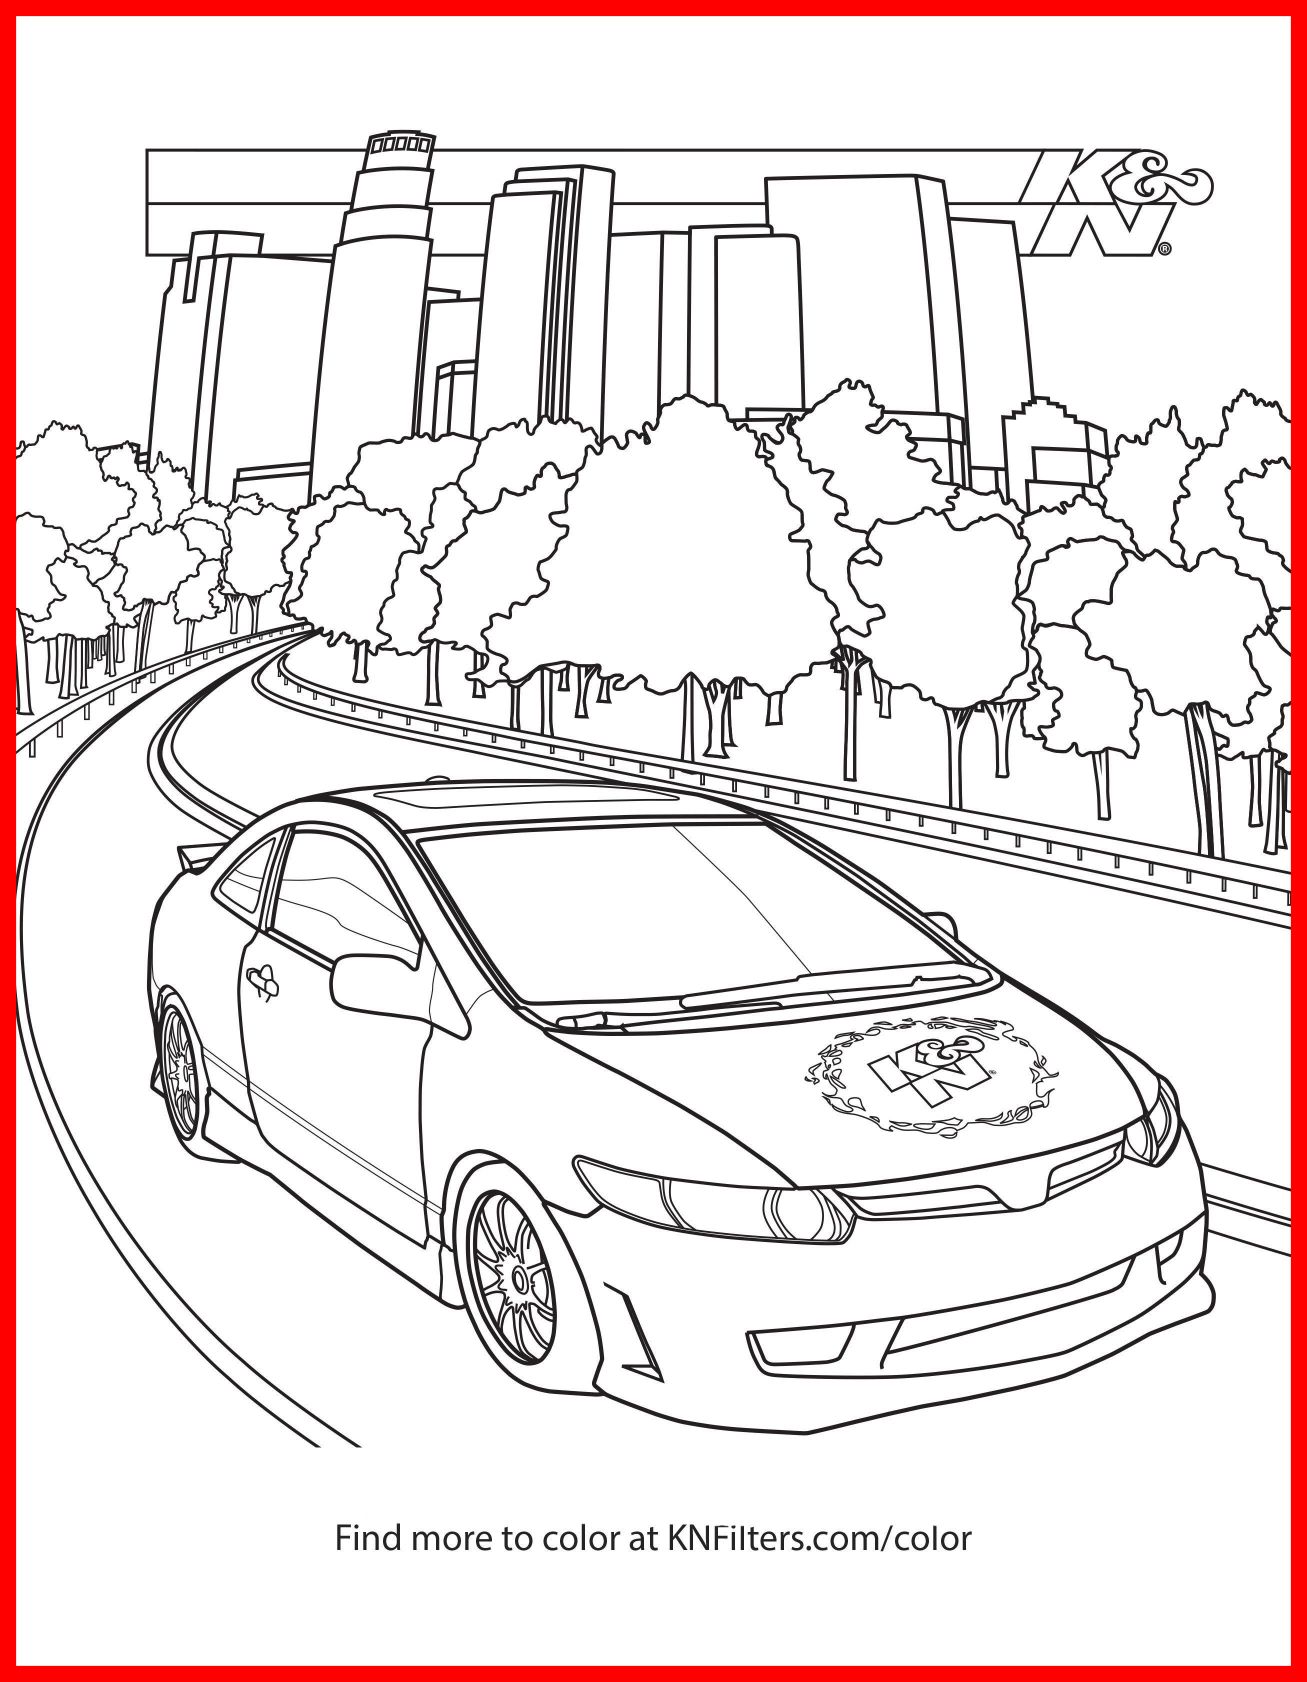 Download Car Parts Coloring Pages at GetDrawings.com | Free for personal use Car Parts Coloring Pages of ...